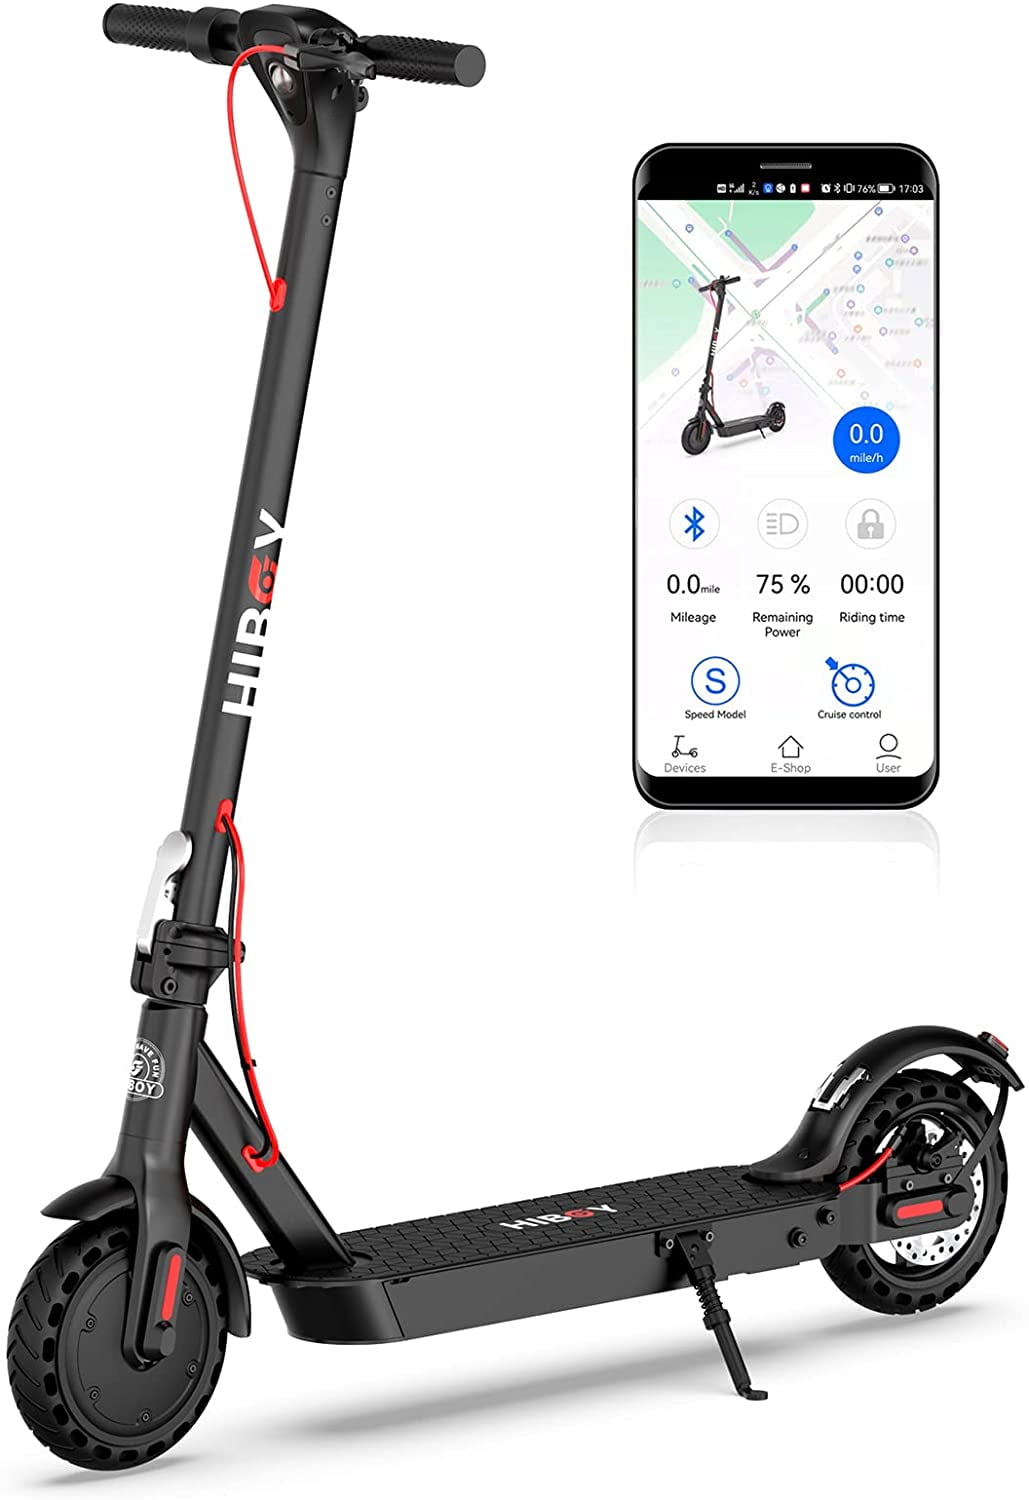 Hiboy KS4 Electric Scooter, Big Unique Display 350W Motor 19 mph & 17 Mile Range 8.5" Honeycomb Tires Rear Suepension, Portable Foldable Commuting Electric Scooter for Adults with Dual and App -